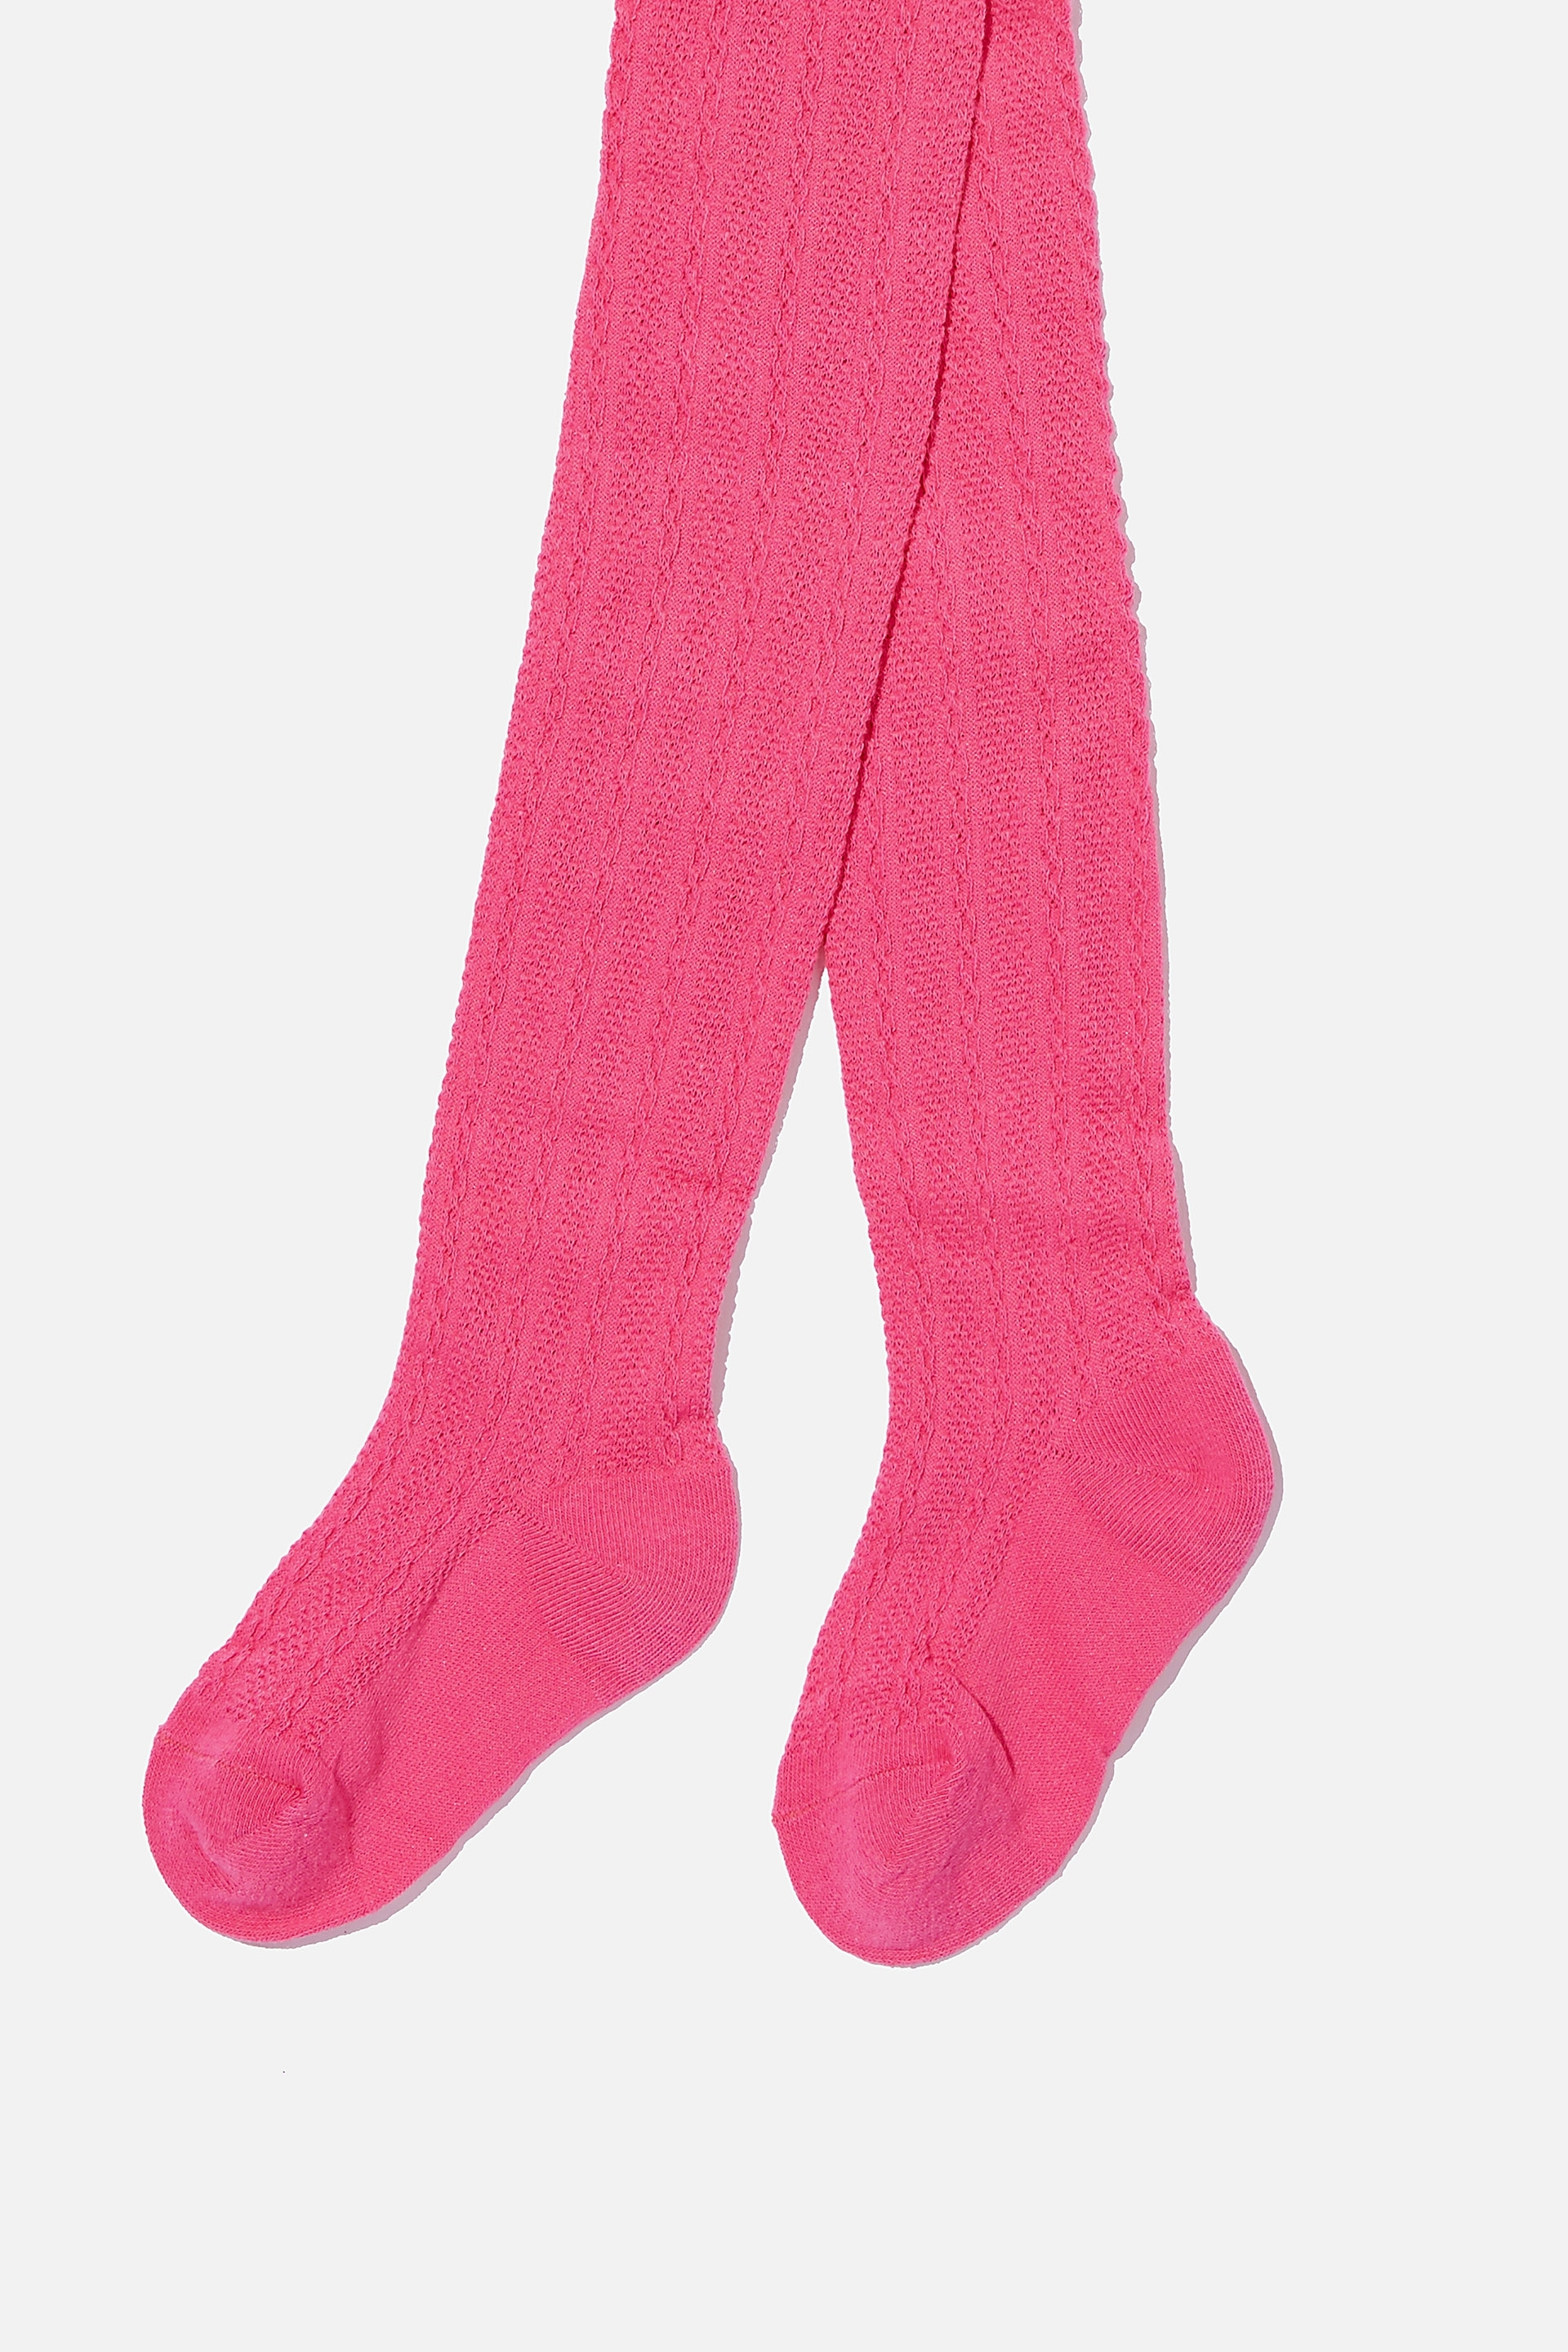 Cotton On Kids - Tilly Tights - Pink gerbera textured